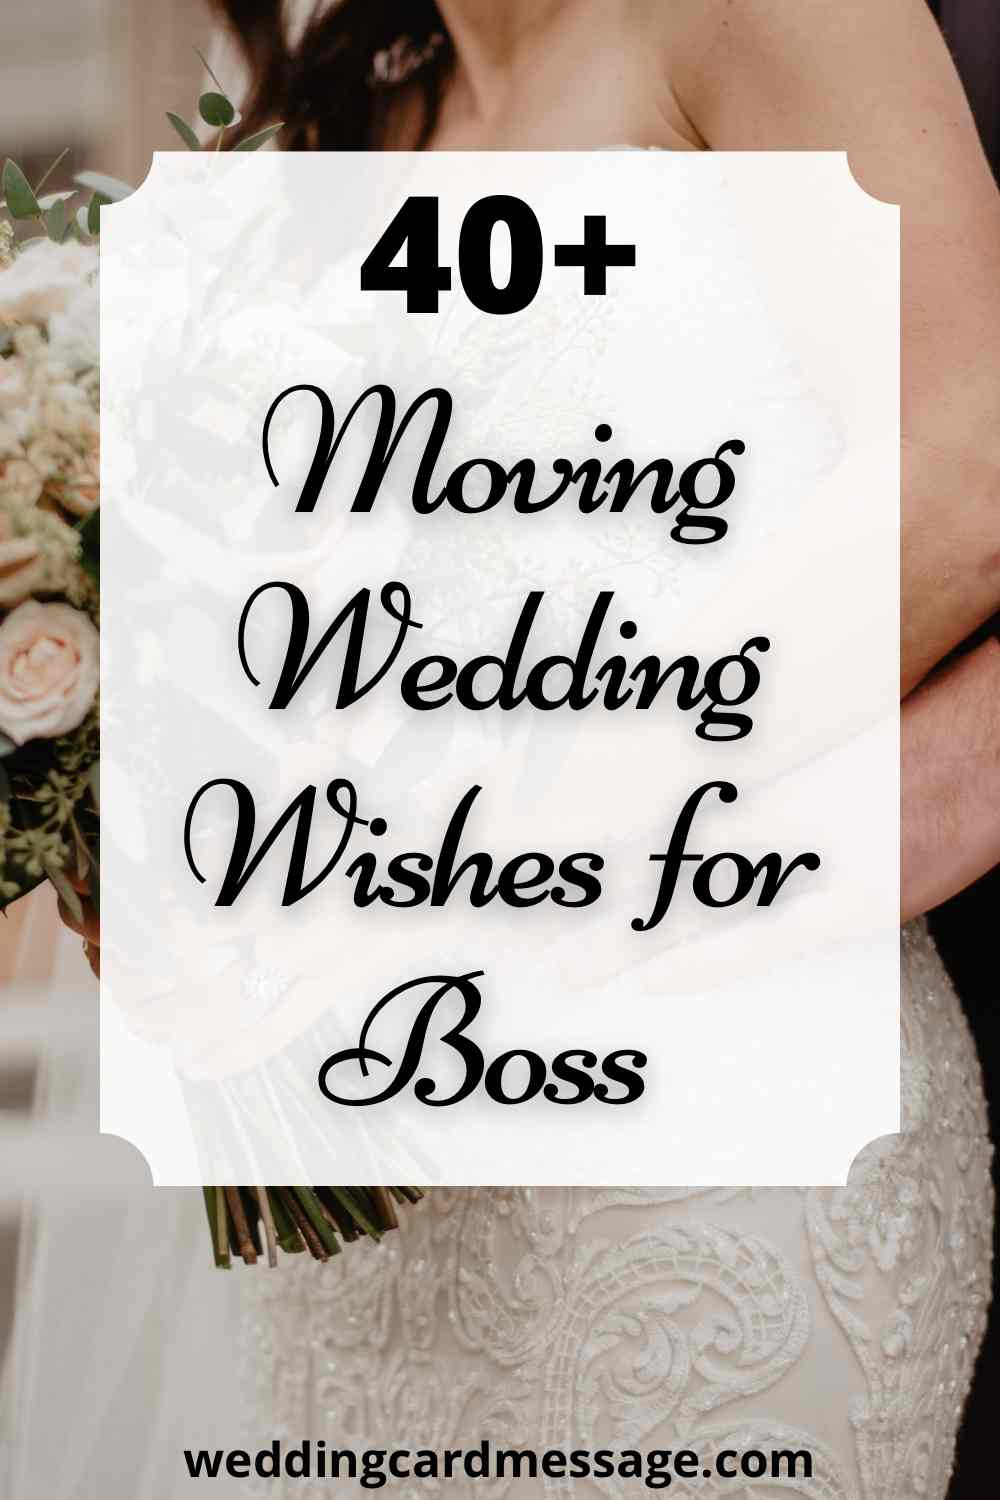 43 Wedding Wishes for your Boss - Wedding Card Message